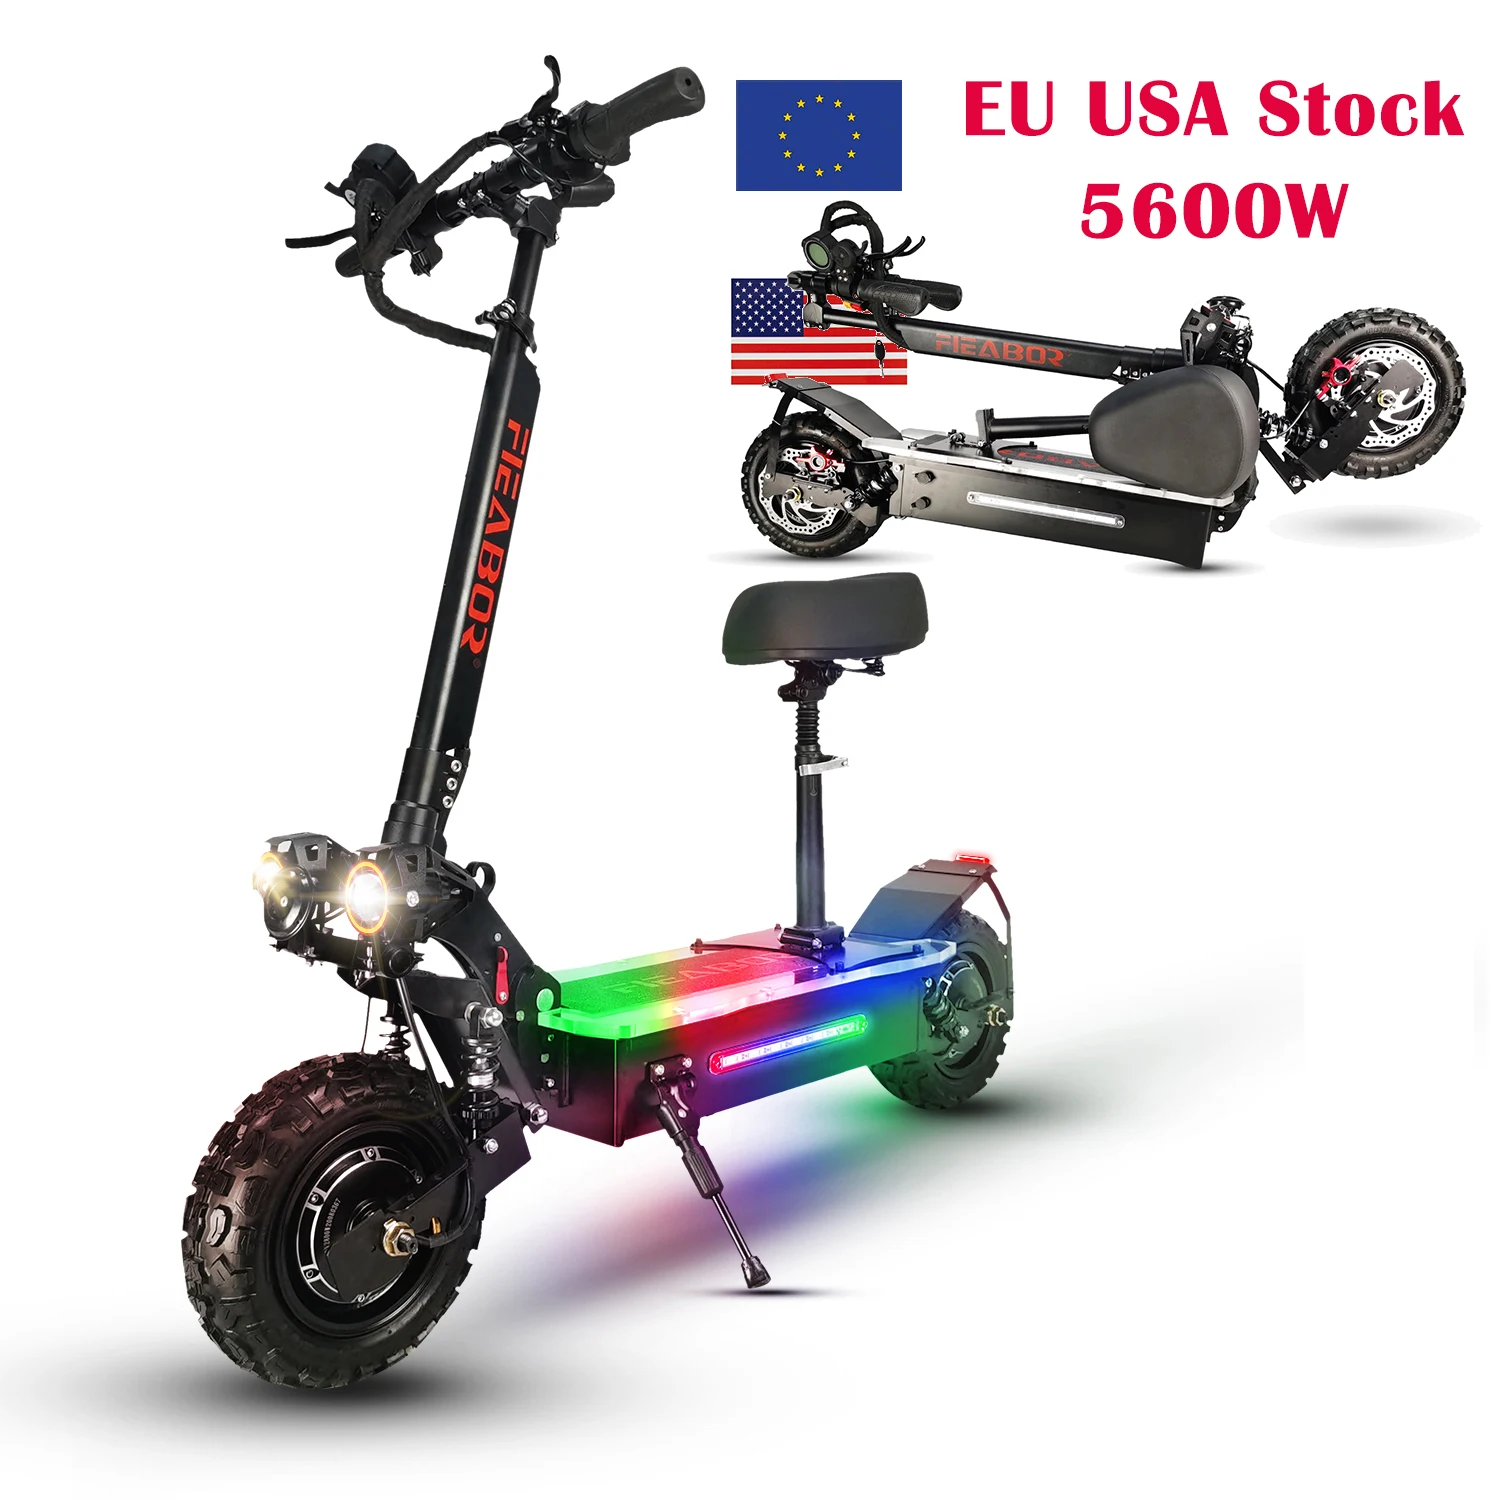 

11inch 5600w 60V 27AH EU USA Wareshoue fast delivery off road electric scooter for Adults